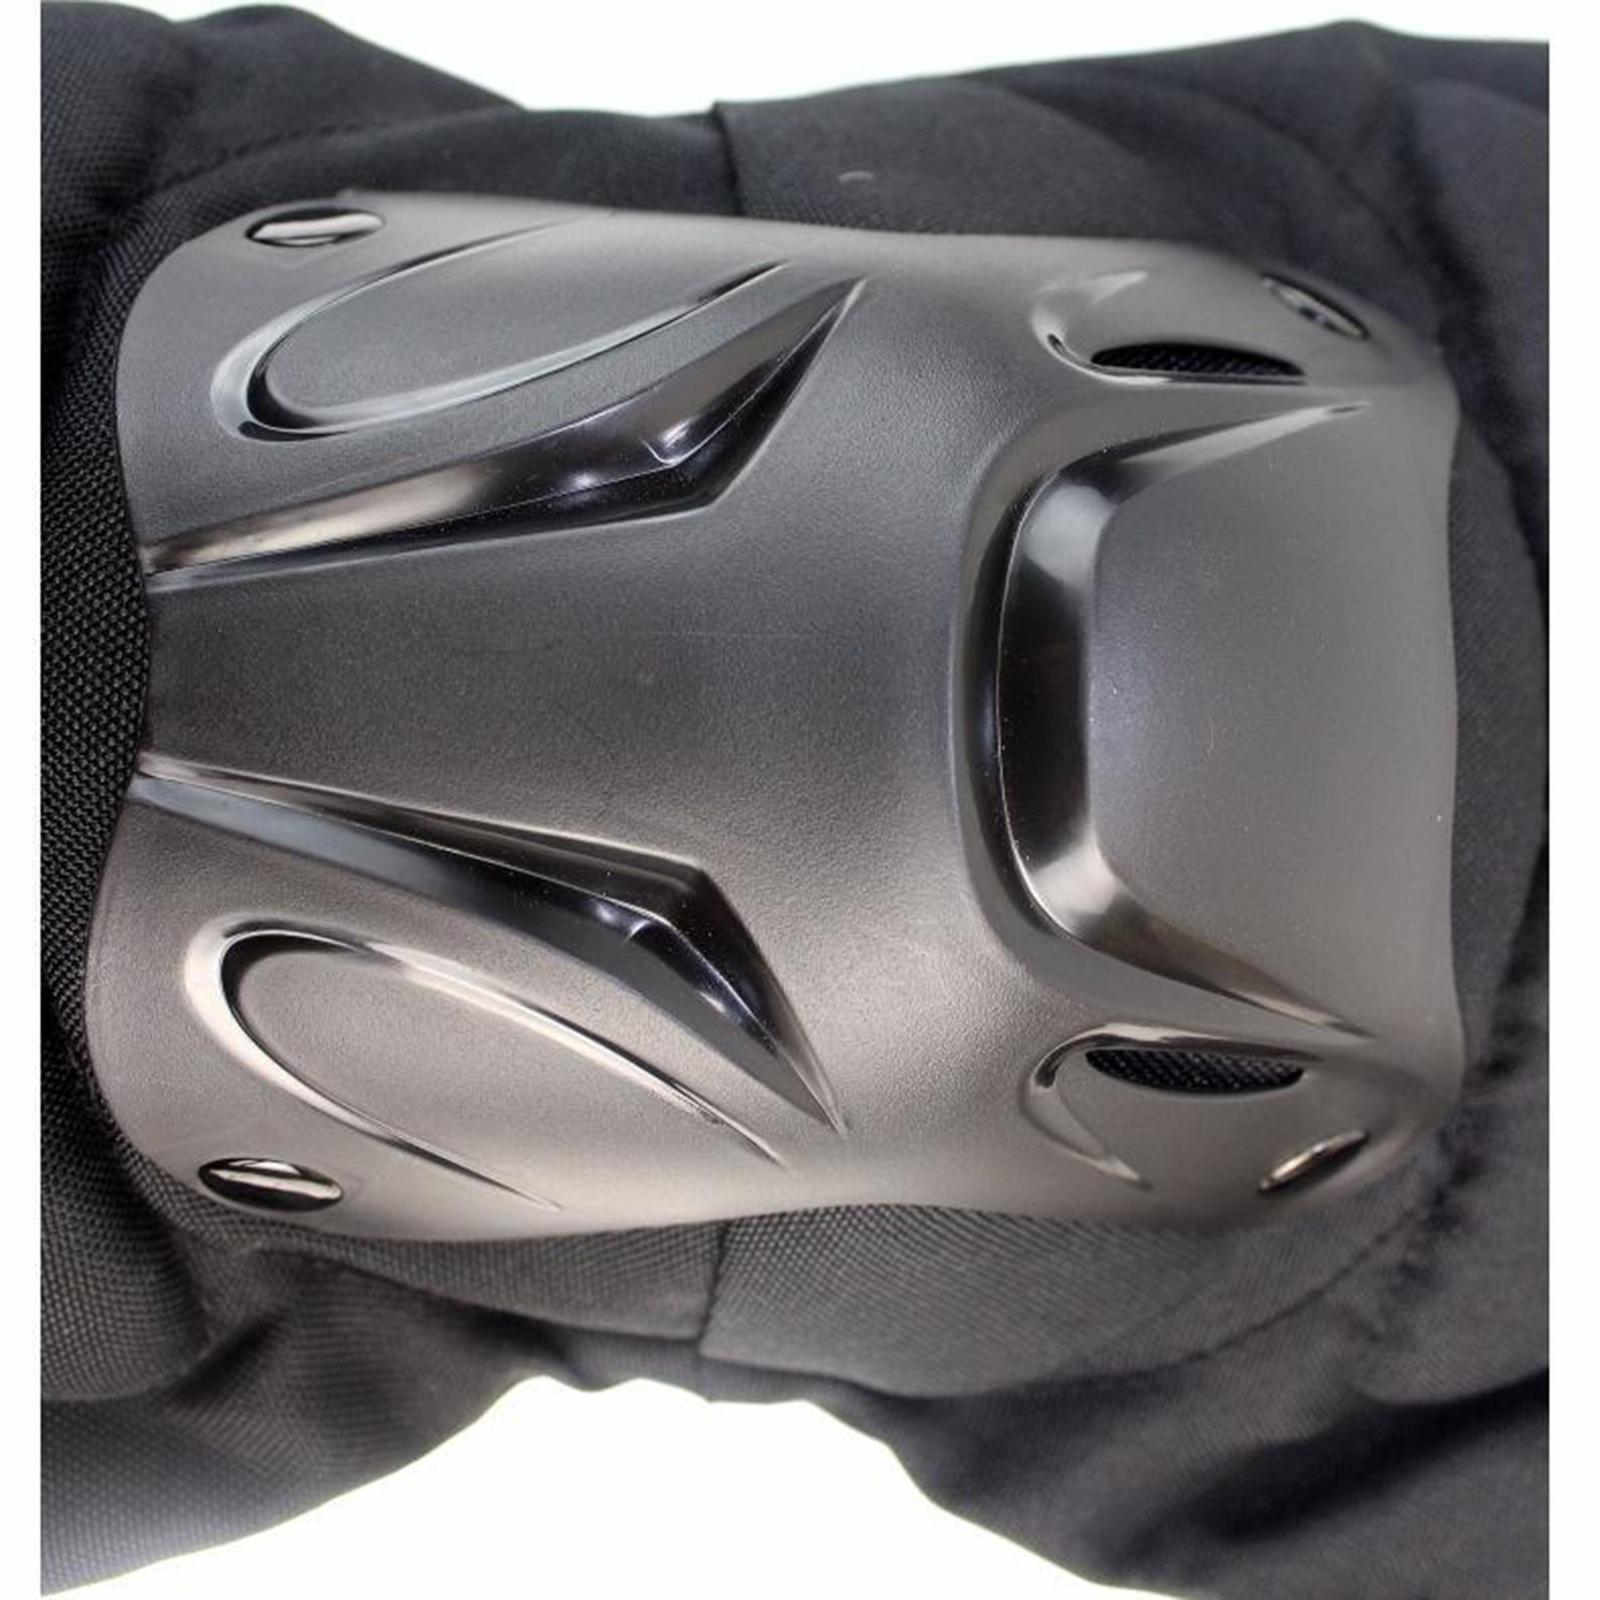 Racing Motorcycle Knee Protection Pad  Shock Proof Safety